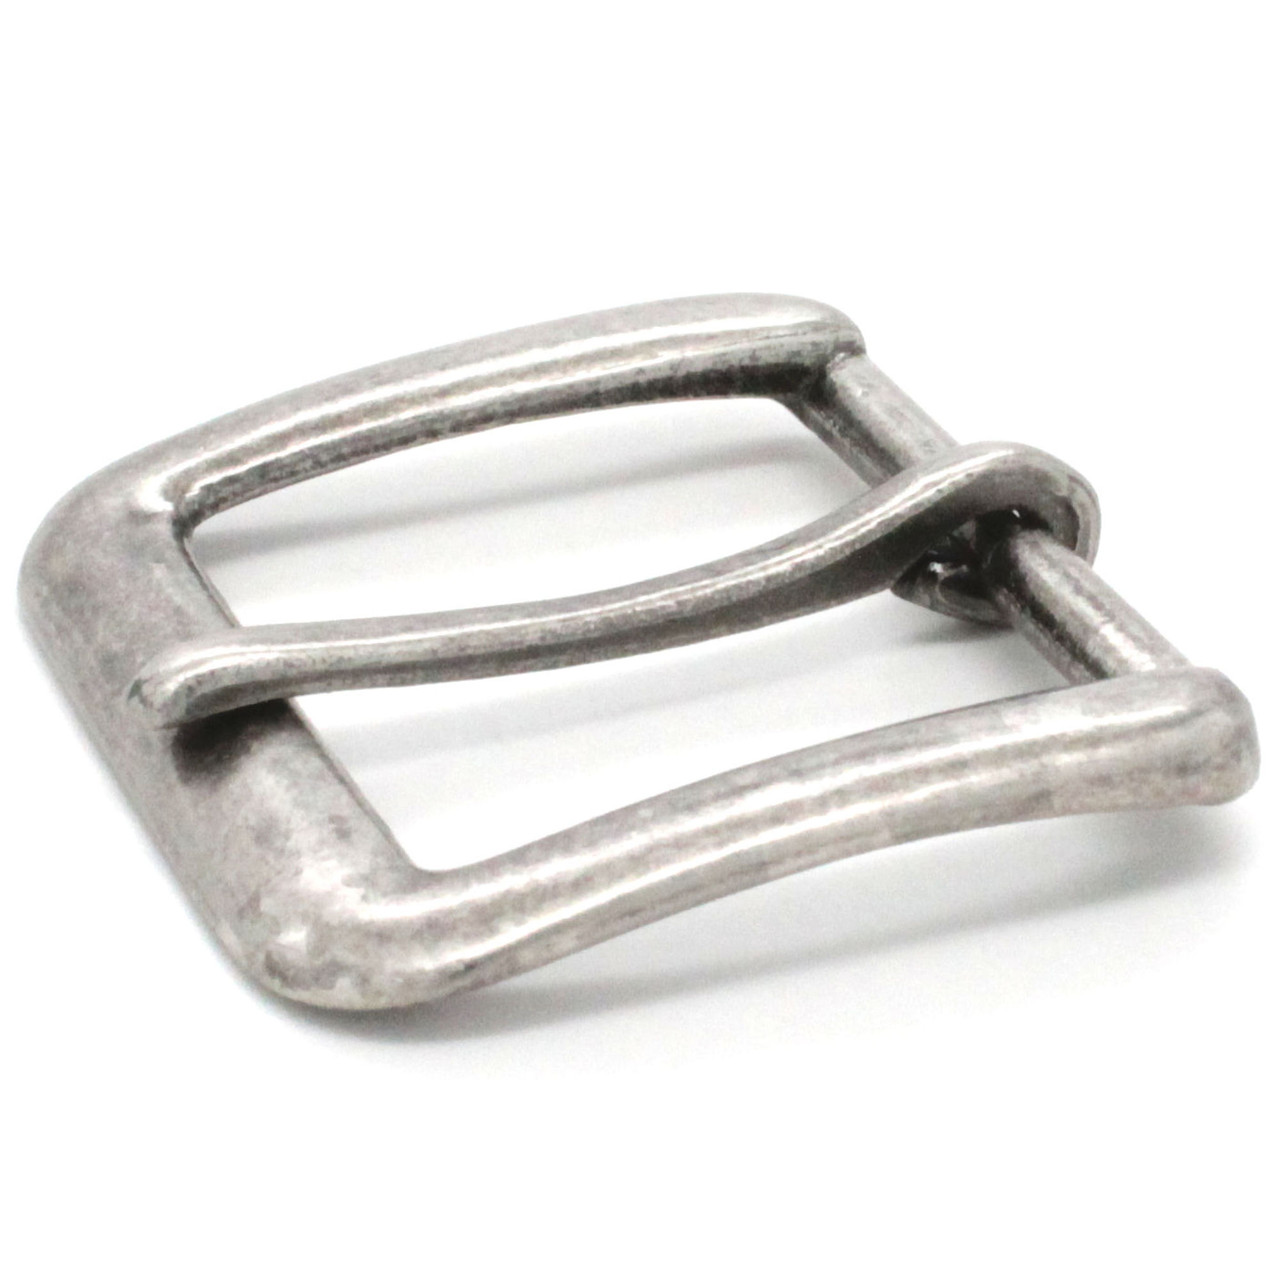 Flat Square end Bar Buckle Antique Nickel 1-1/2" Down